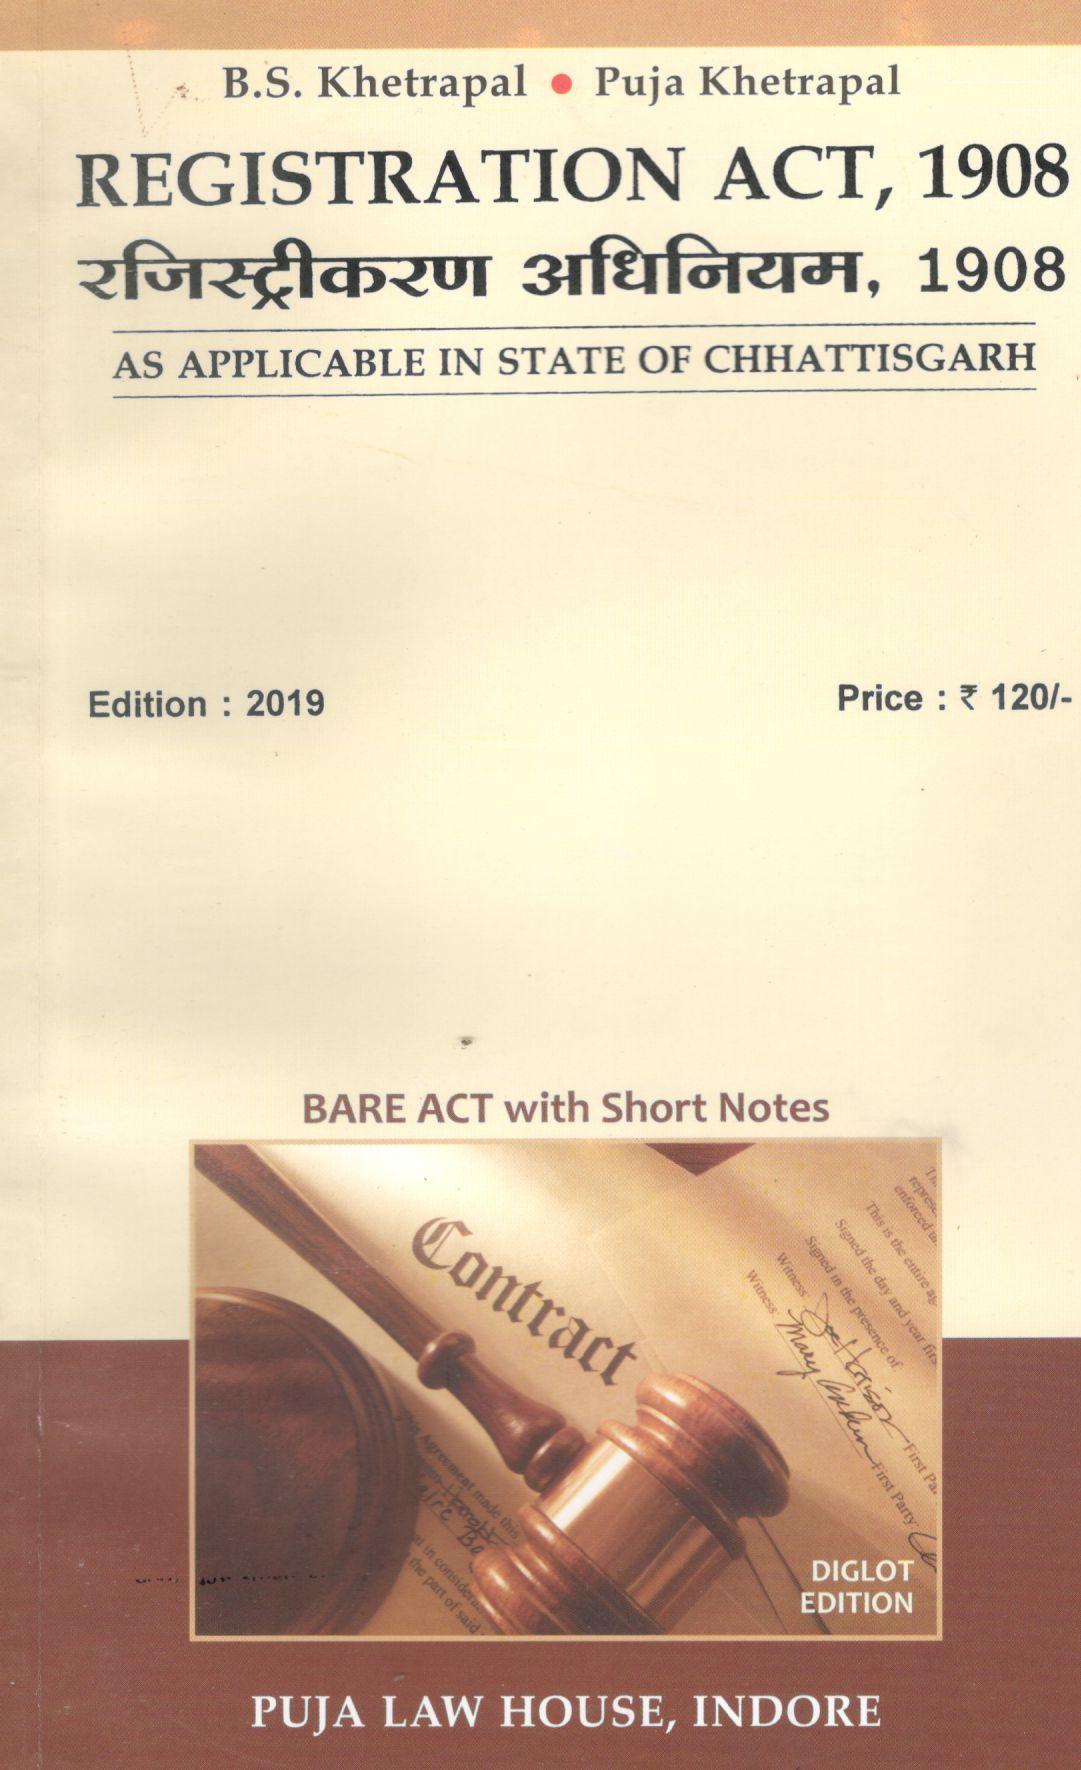  Buy रजिस्ट्रेशन अधिनियम, 1908 / Registration Act, 1908 (As applicable in the State of Chhattisgarh)